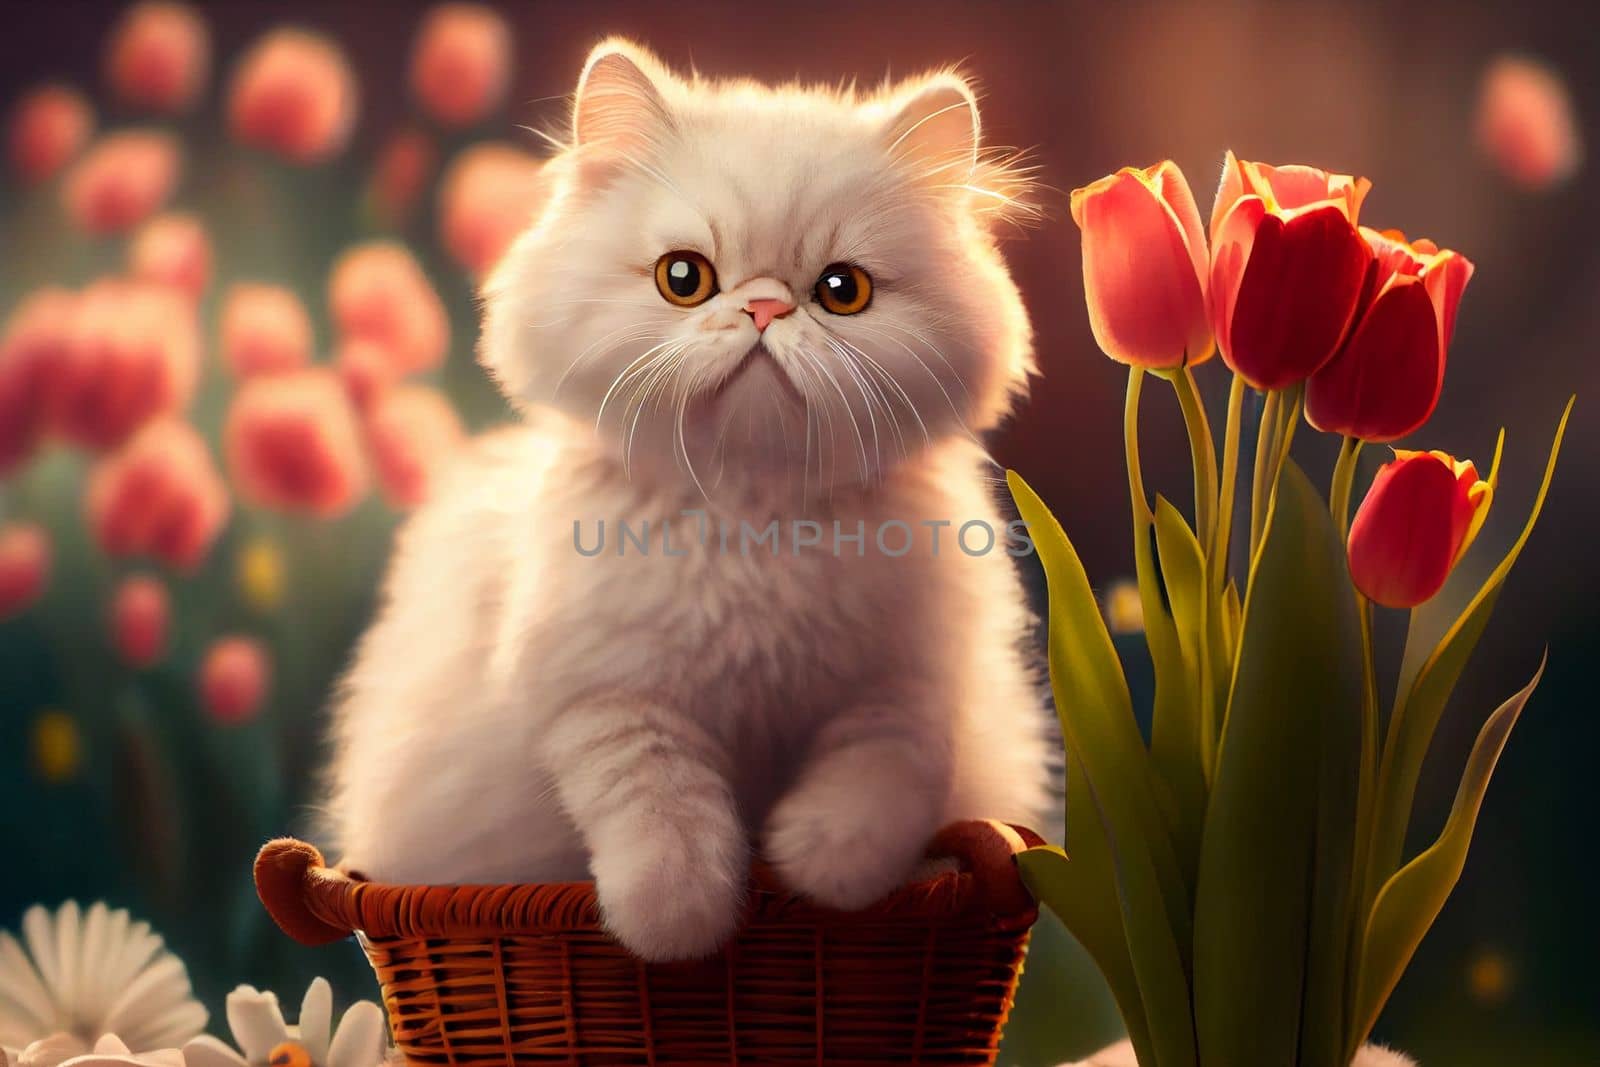 cute white cat in a wicker basket on a background of red tulips by studiodav